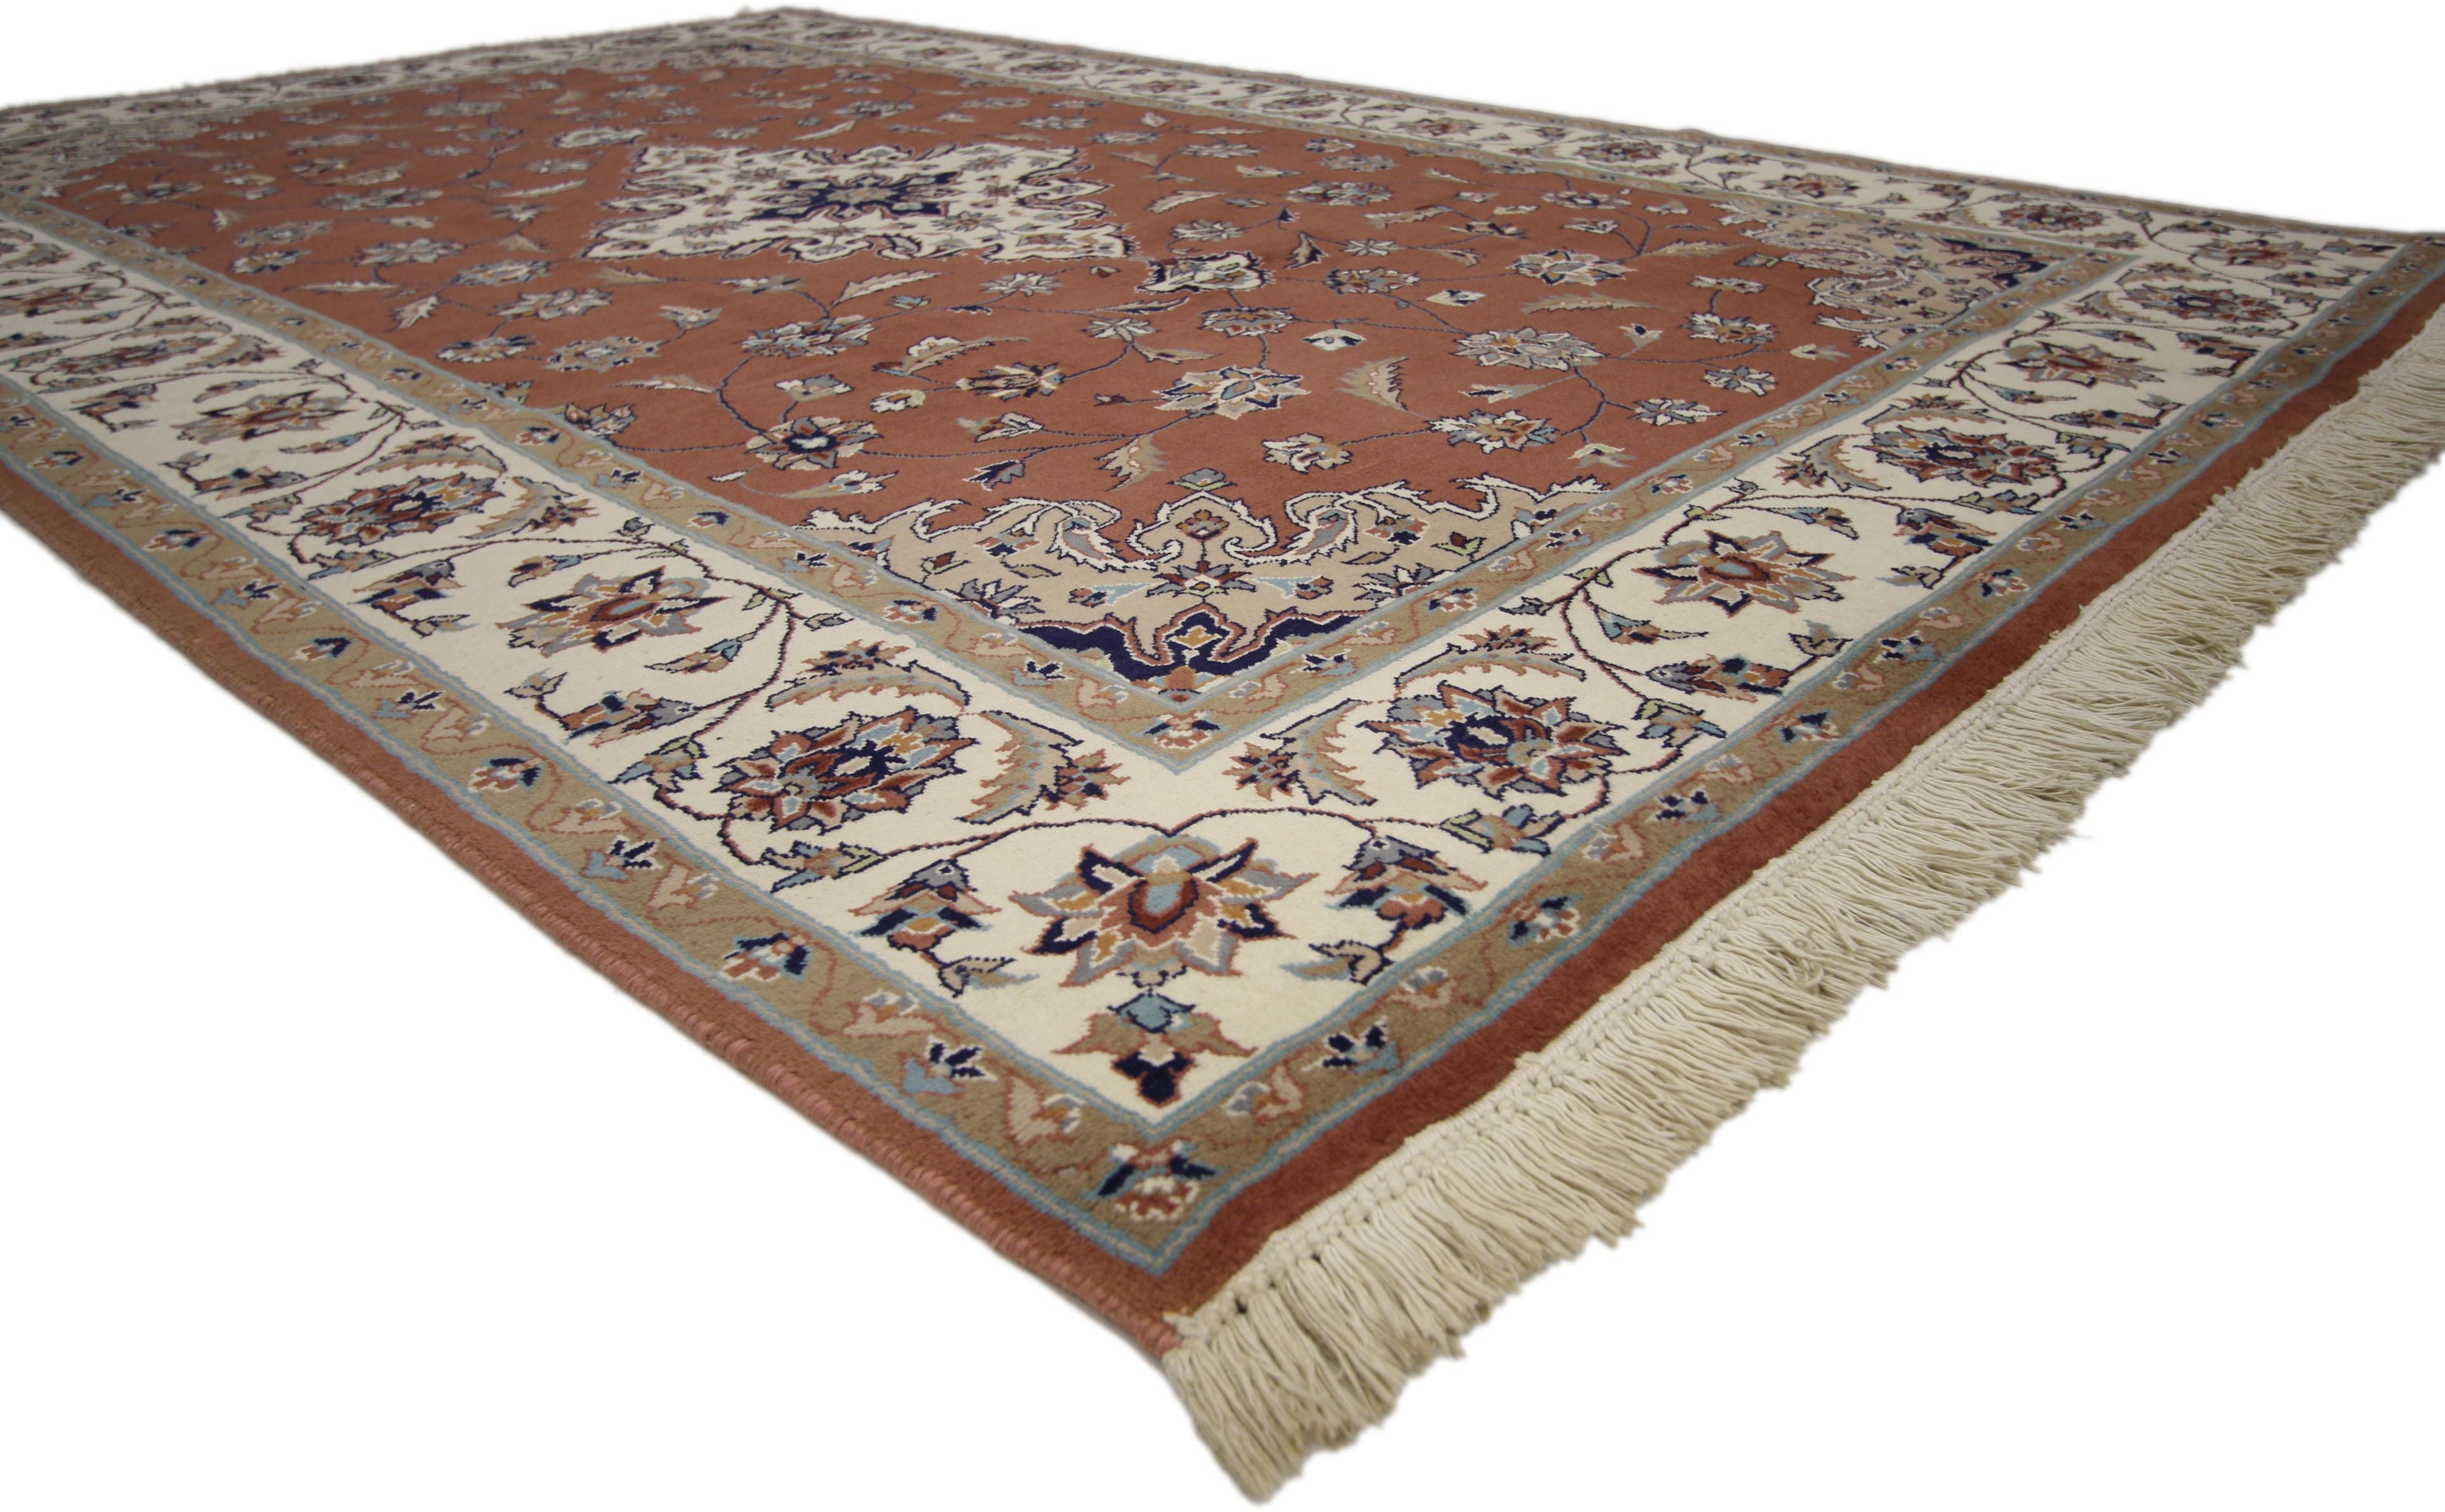 72029 Vintage Pakistani Rug with Persian Design with Arabesque Arts & Crafts Style. This hand knotted wool vintage Pakistani rug beautifully displays a Persian design. It features a cusped cream medallion anchored with pendants floating on an